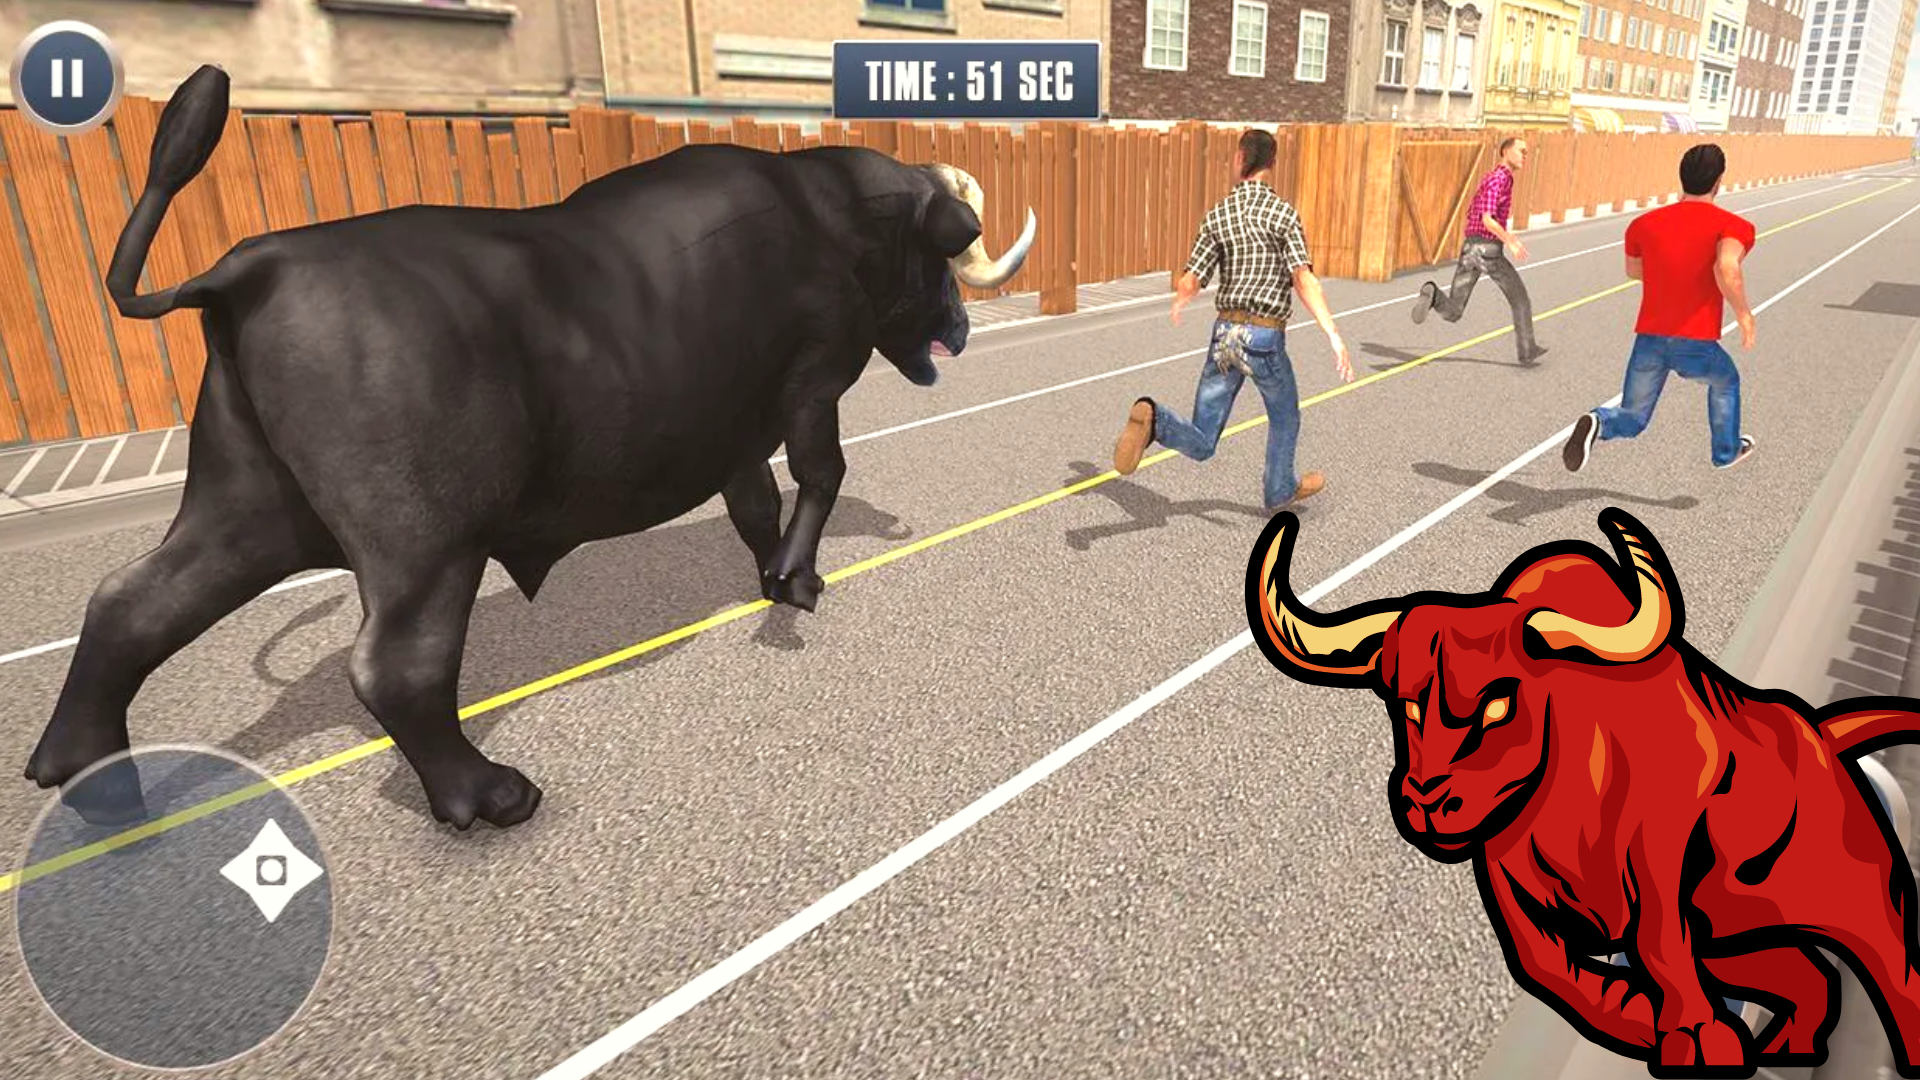 Angry Bull Fight Shooting Game